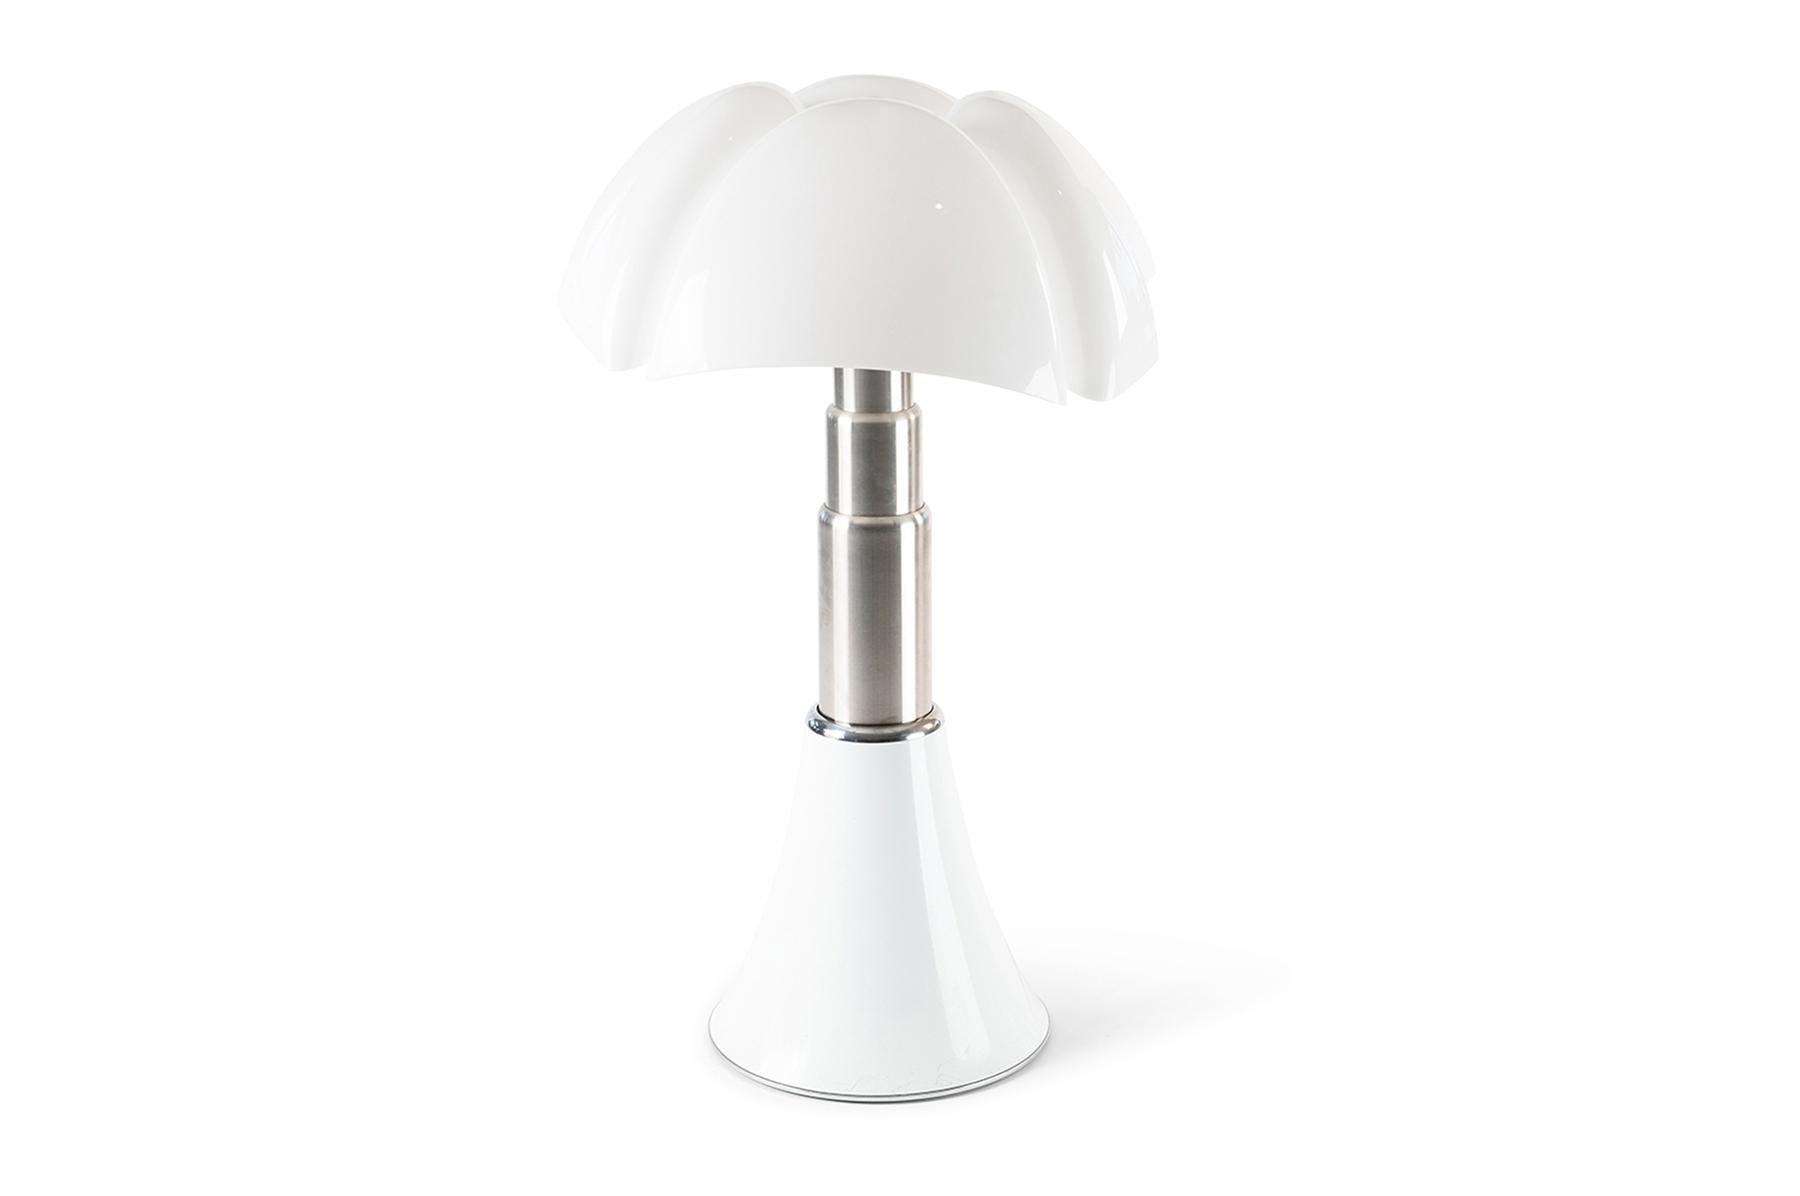 Large Pipistrello table lamp in white by Gae Aulenti for Martinelli Luce. The glazed stainless steel telescope style conic base allows this lamp to have an adjustable height. The height adjusts from 28